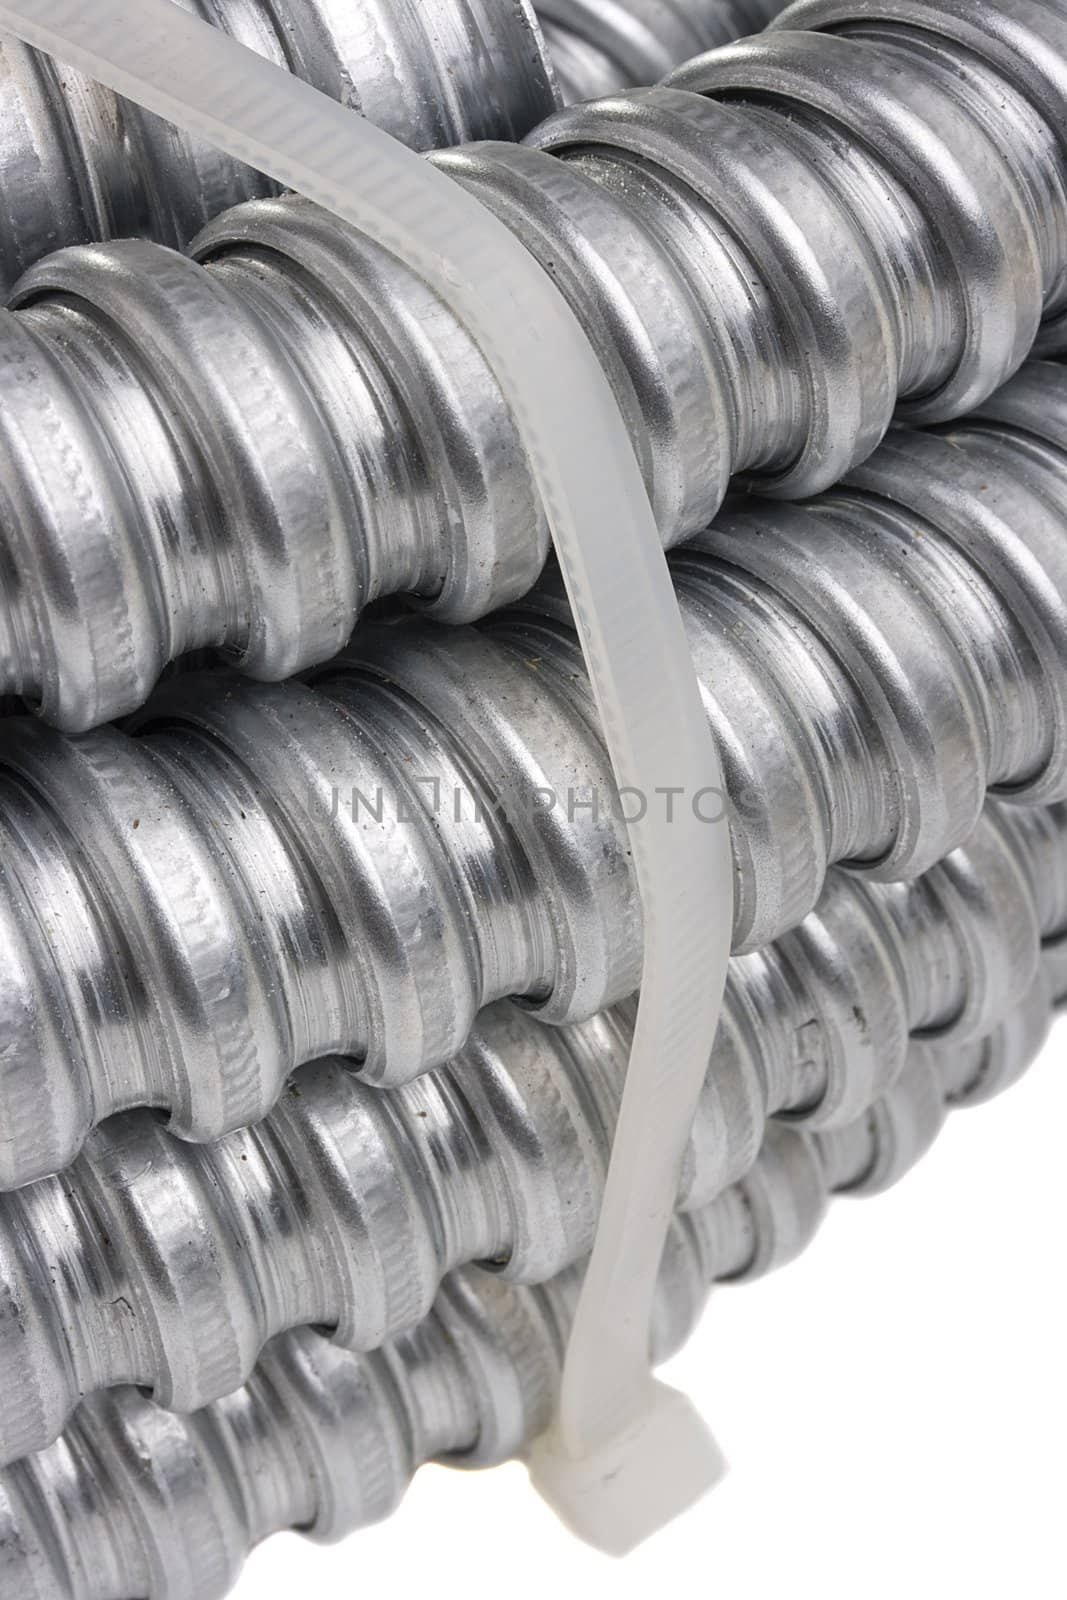 Packed metal cable protection conduit on a white background.